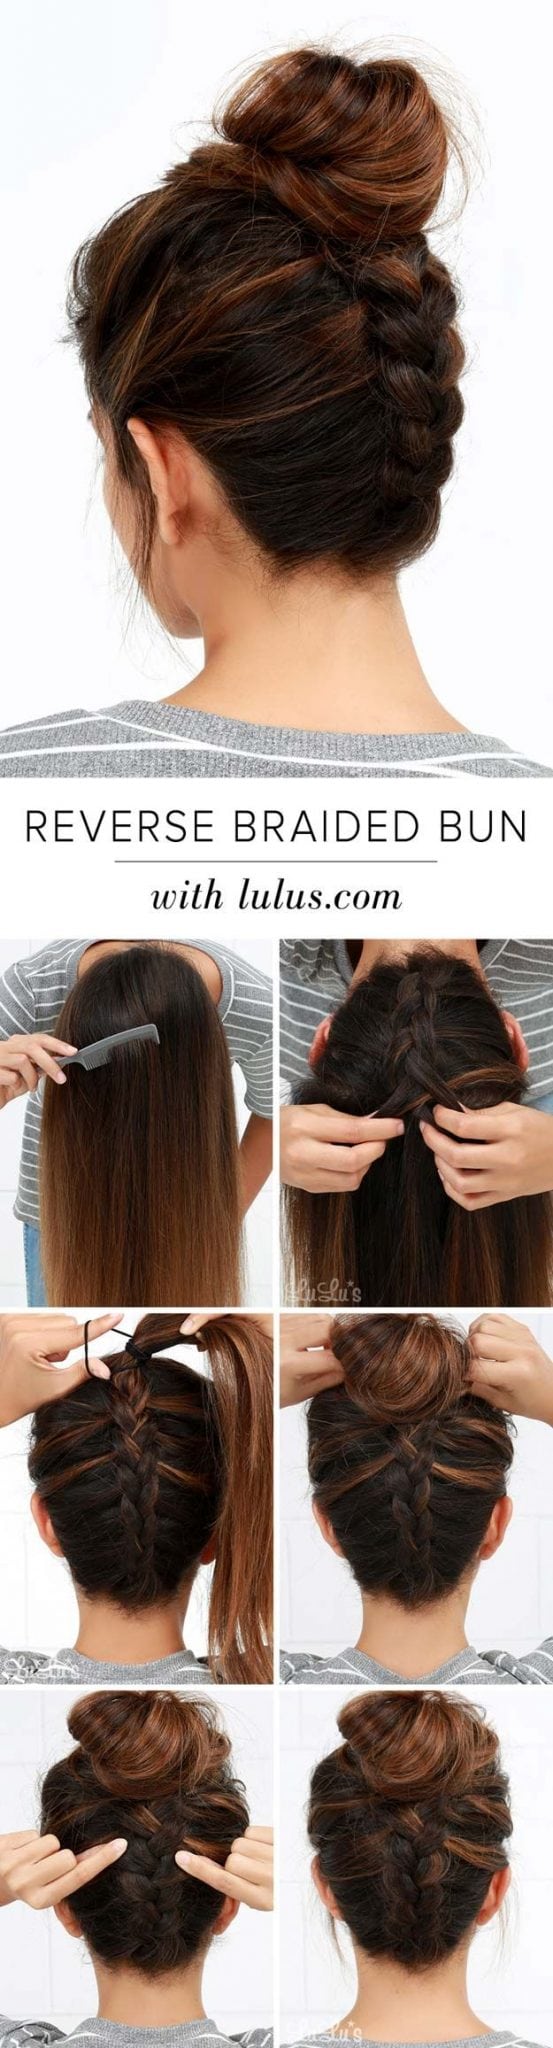 [ad_1]

Cool and Easy DIY Hairstyles – Reversed Braided Bun – Quick and Easy Ideas for Back to School Styles for Medium, Short and Long Hair – Fun Tips and Best Step by Step Tutorials for Teens, Prom, Weddings, Special Occasions…